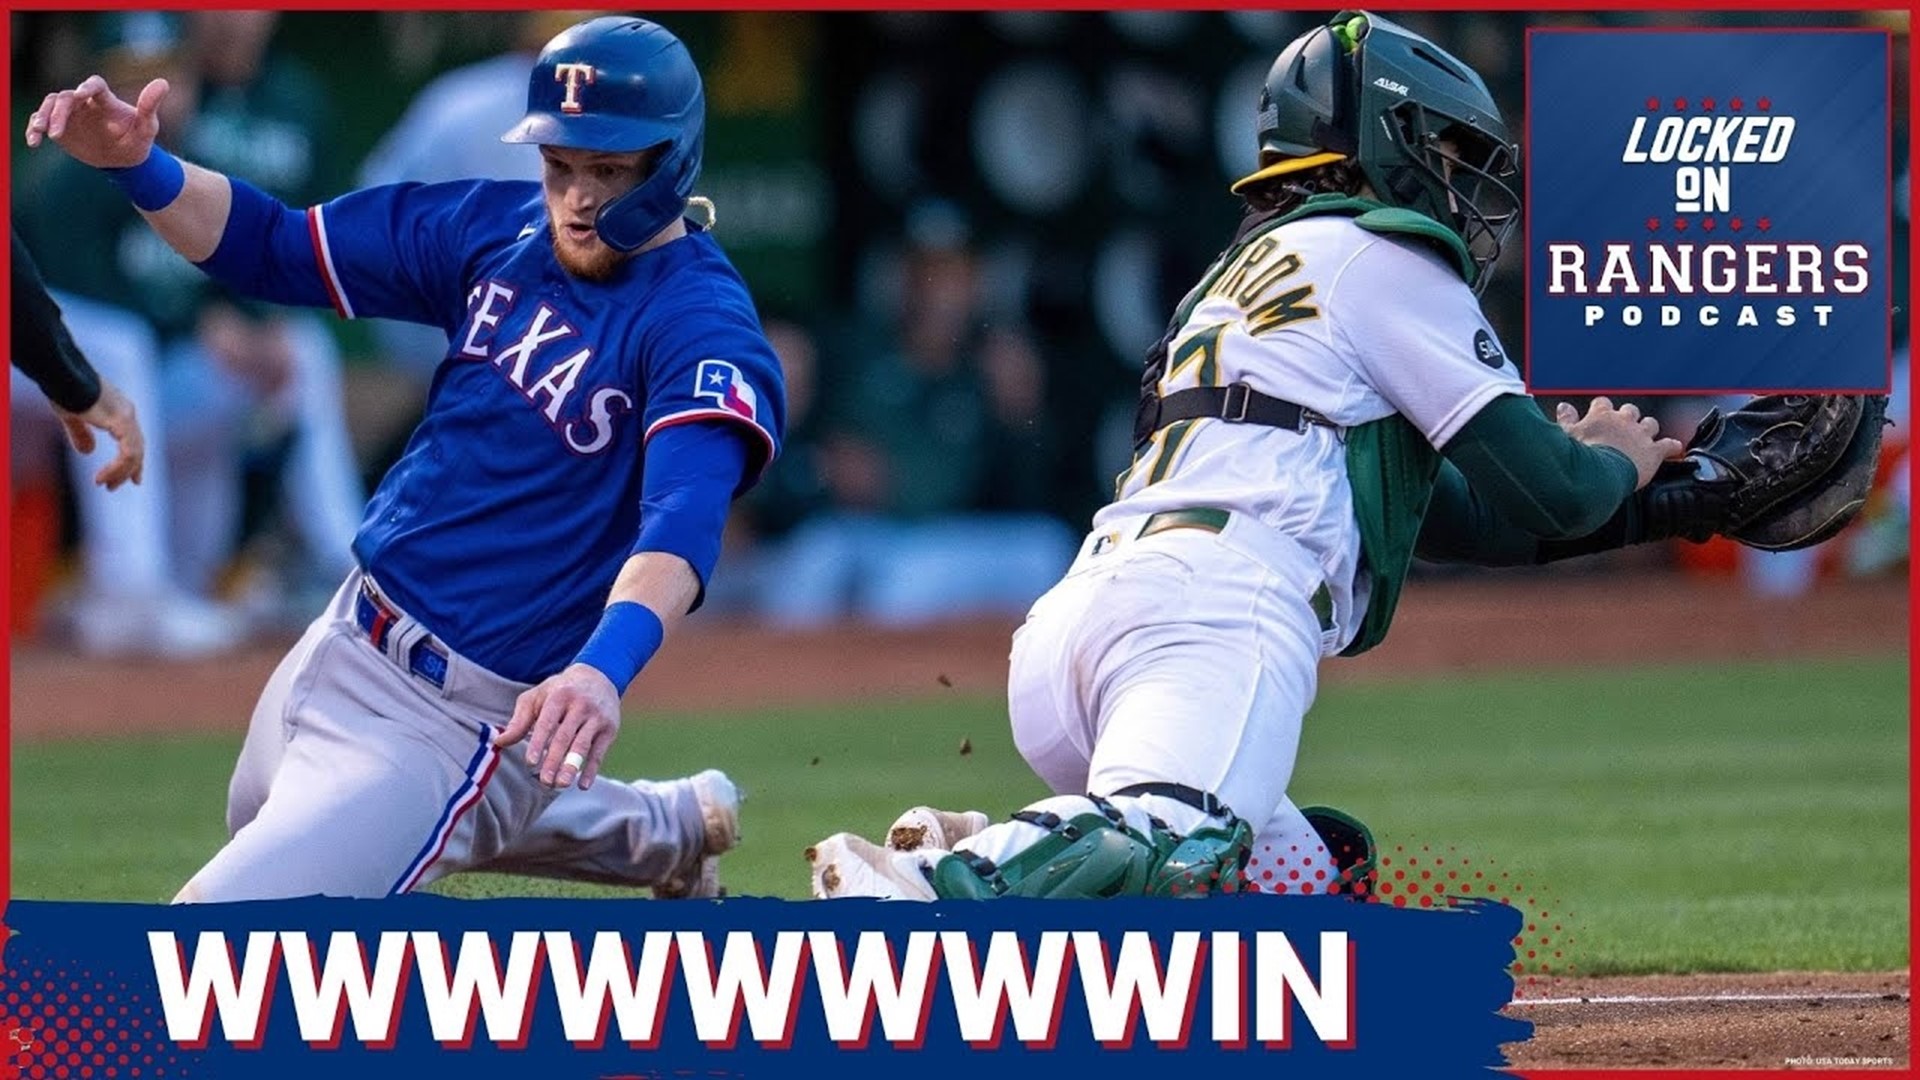 The Texas Rangers won their eighth straight game by beating the Oakland A's thanks to big hits from Corey Seager, Marcus Semien and Nathaniel Lowe.